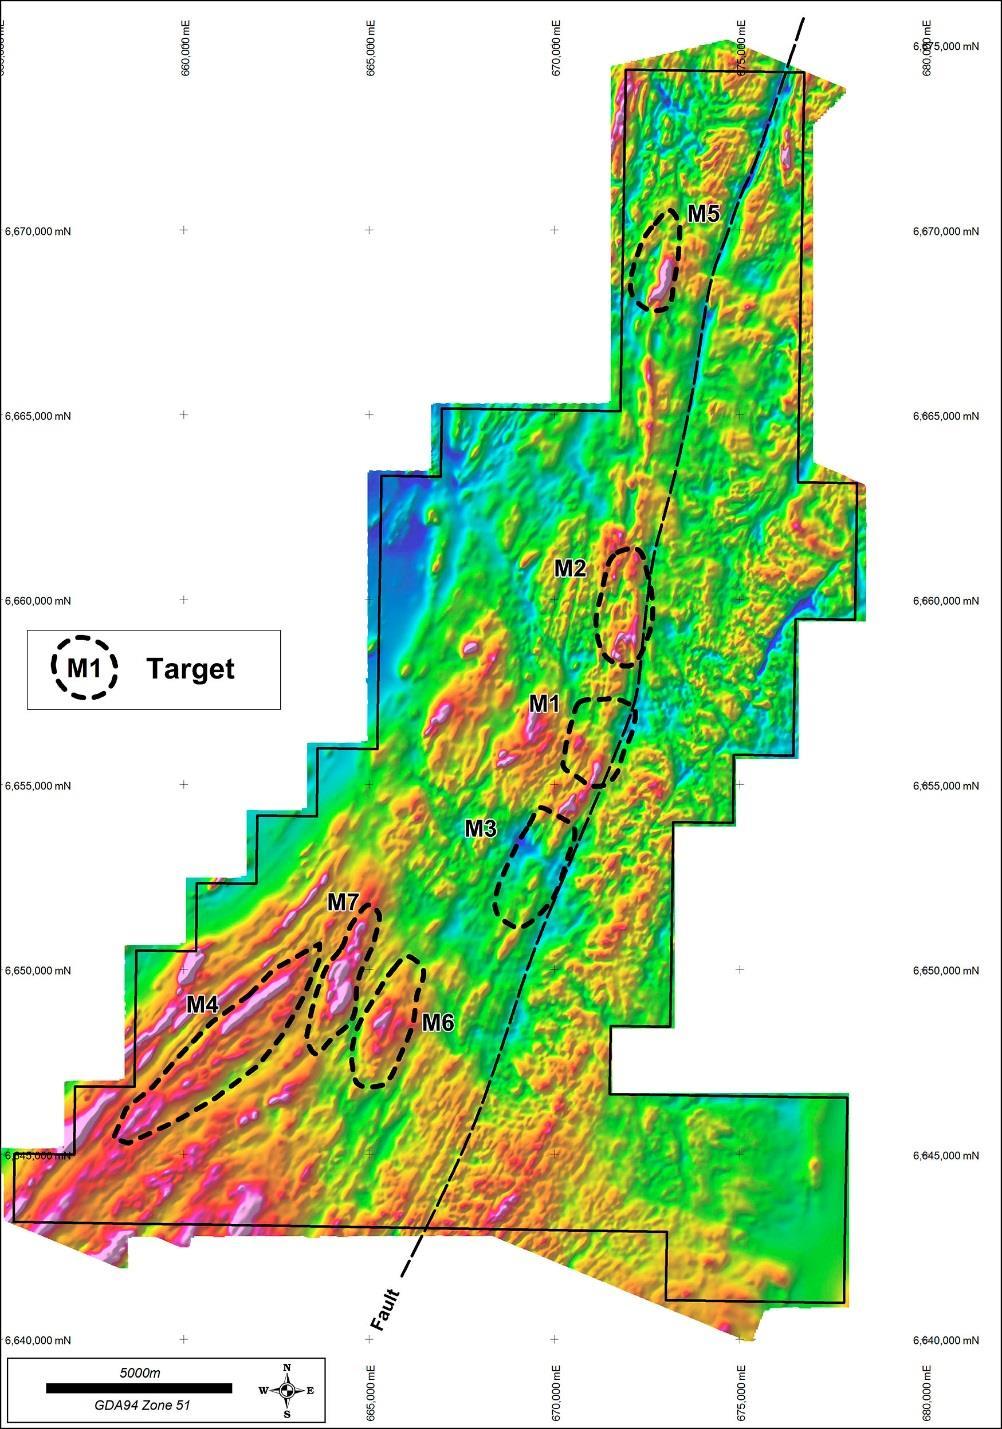 Technical Discussion Aeromagnetic Survey Interpretation Following the recent acquisition of detailed aeromagnetic data over E28/2342, Legend commissioned a geophysical consultant to assist with data